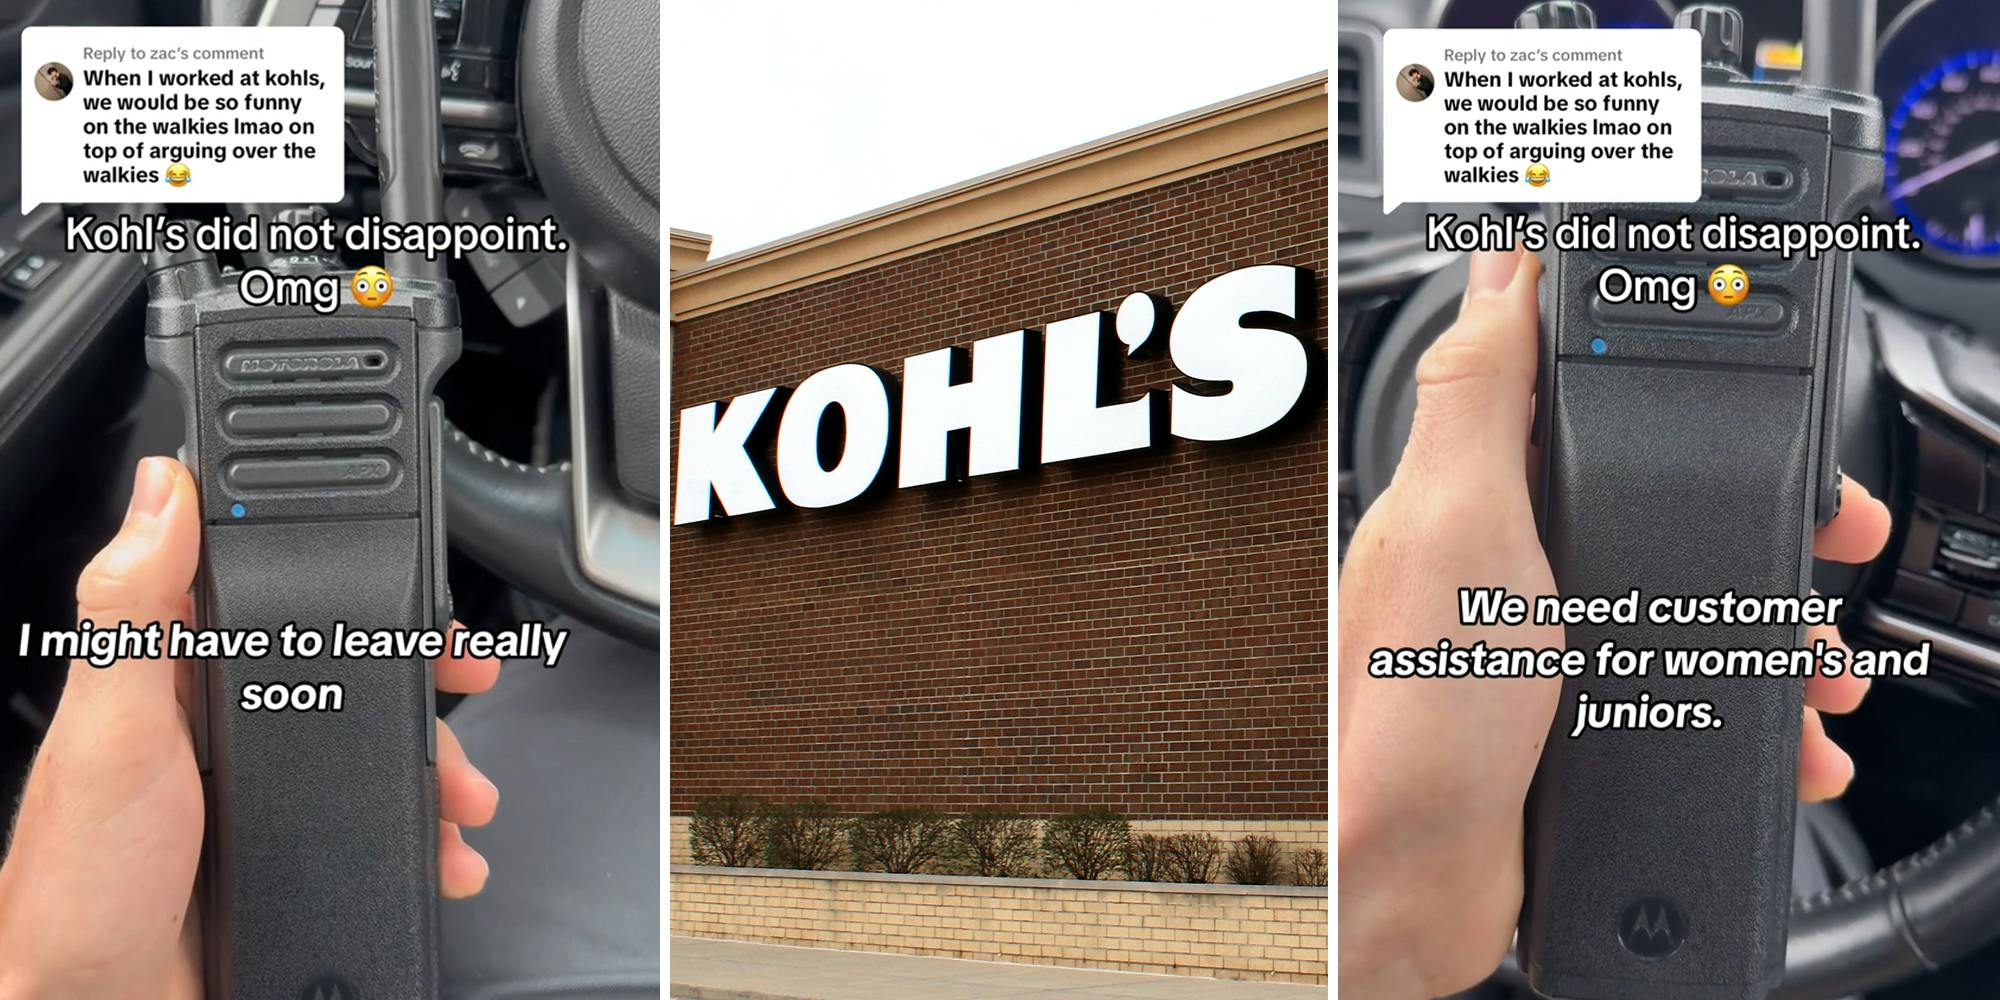 Customer uses walkie to eavesdrop on Kohl’s employees talking about their co-workers